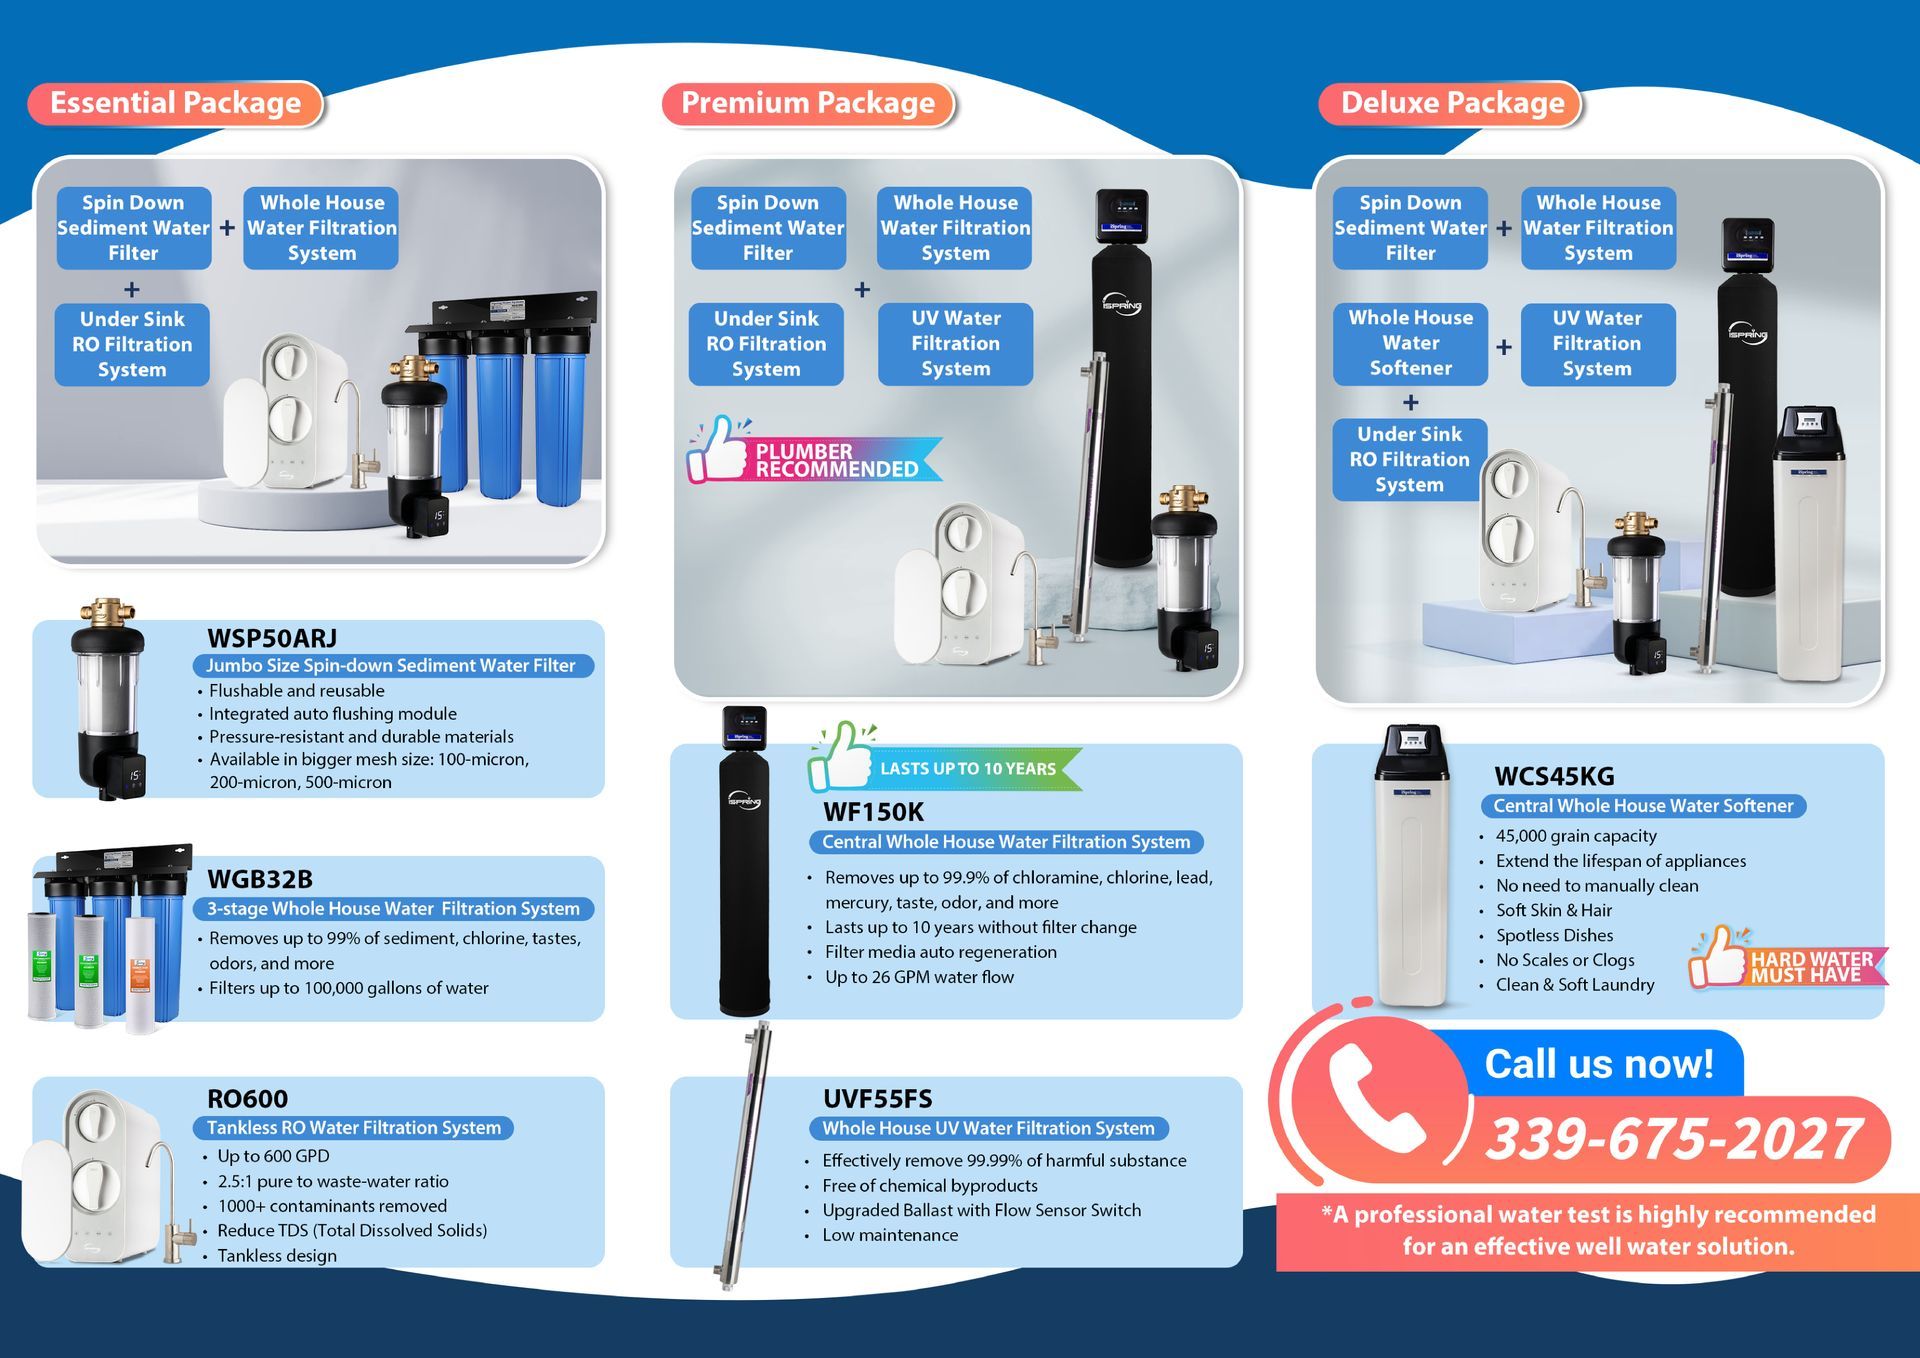 ispring water filtration